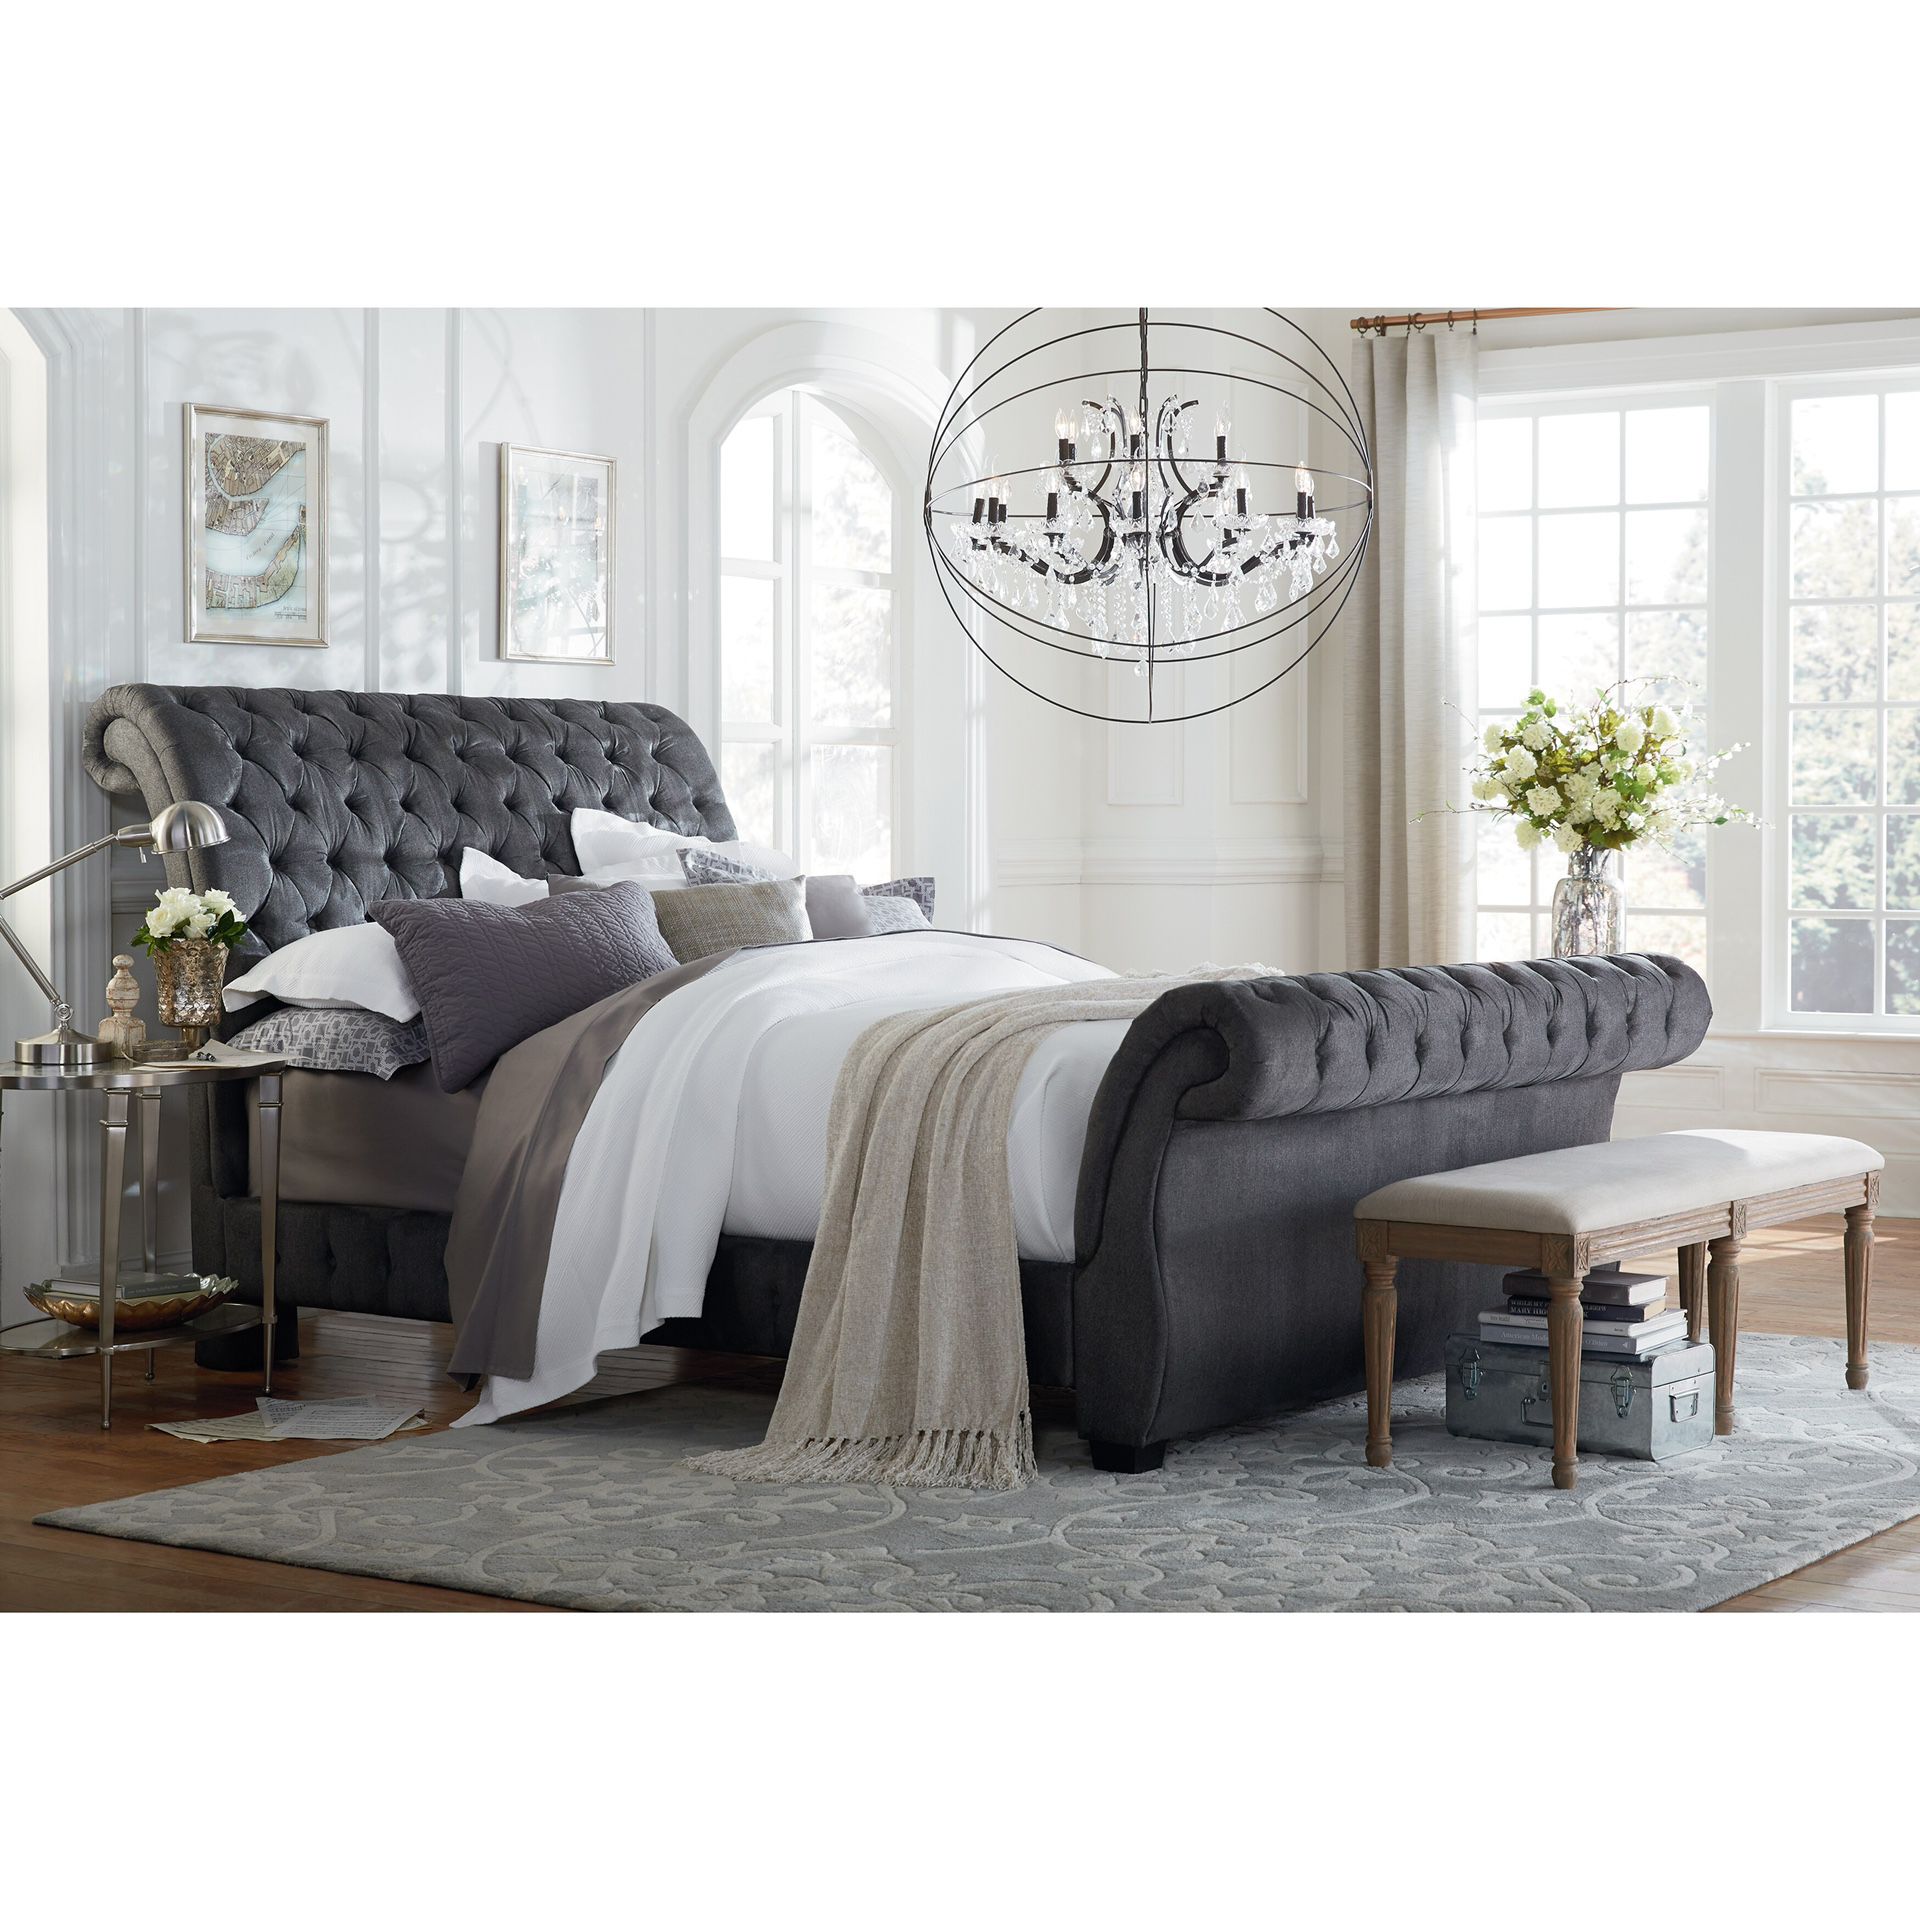 King Size Gorgeous Grey Bed 